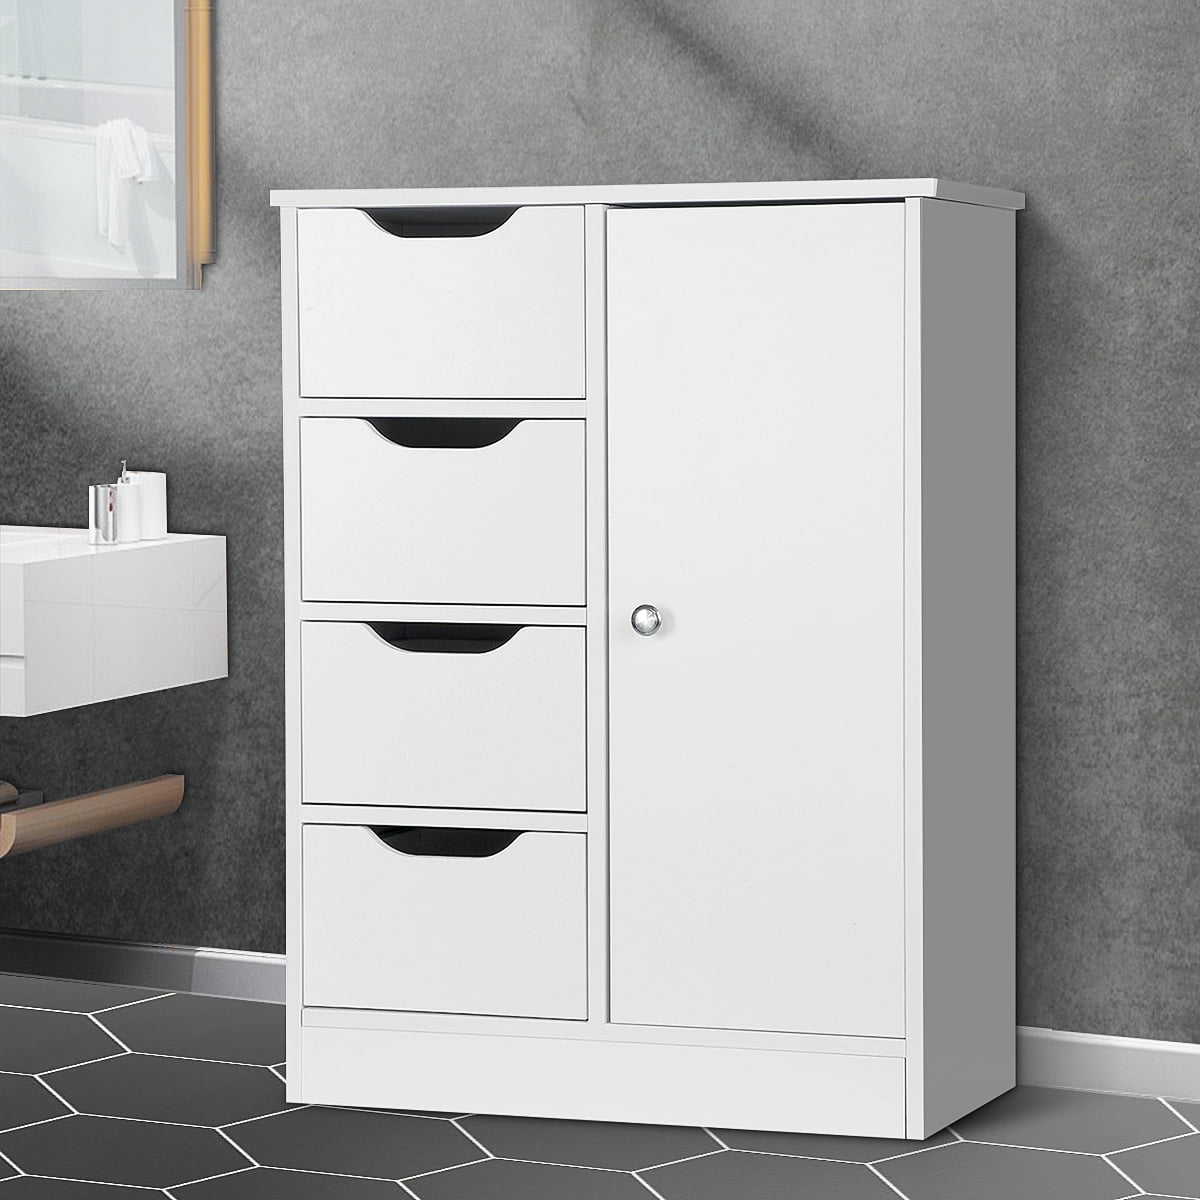 NEW BOXED BATHROOM STORGE CABINET CUPBOARD STAND WHITE WOODEN DOOR 4 DRAWER UNIT 